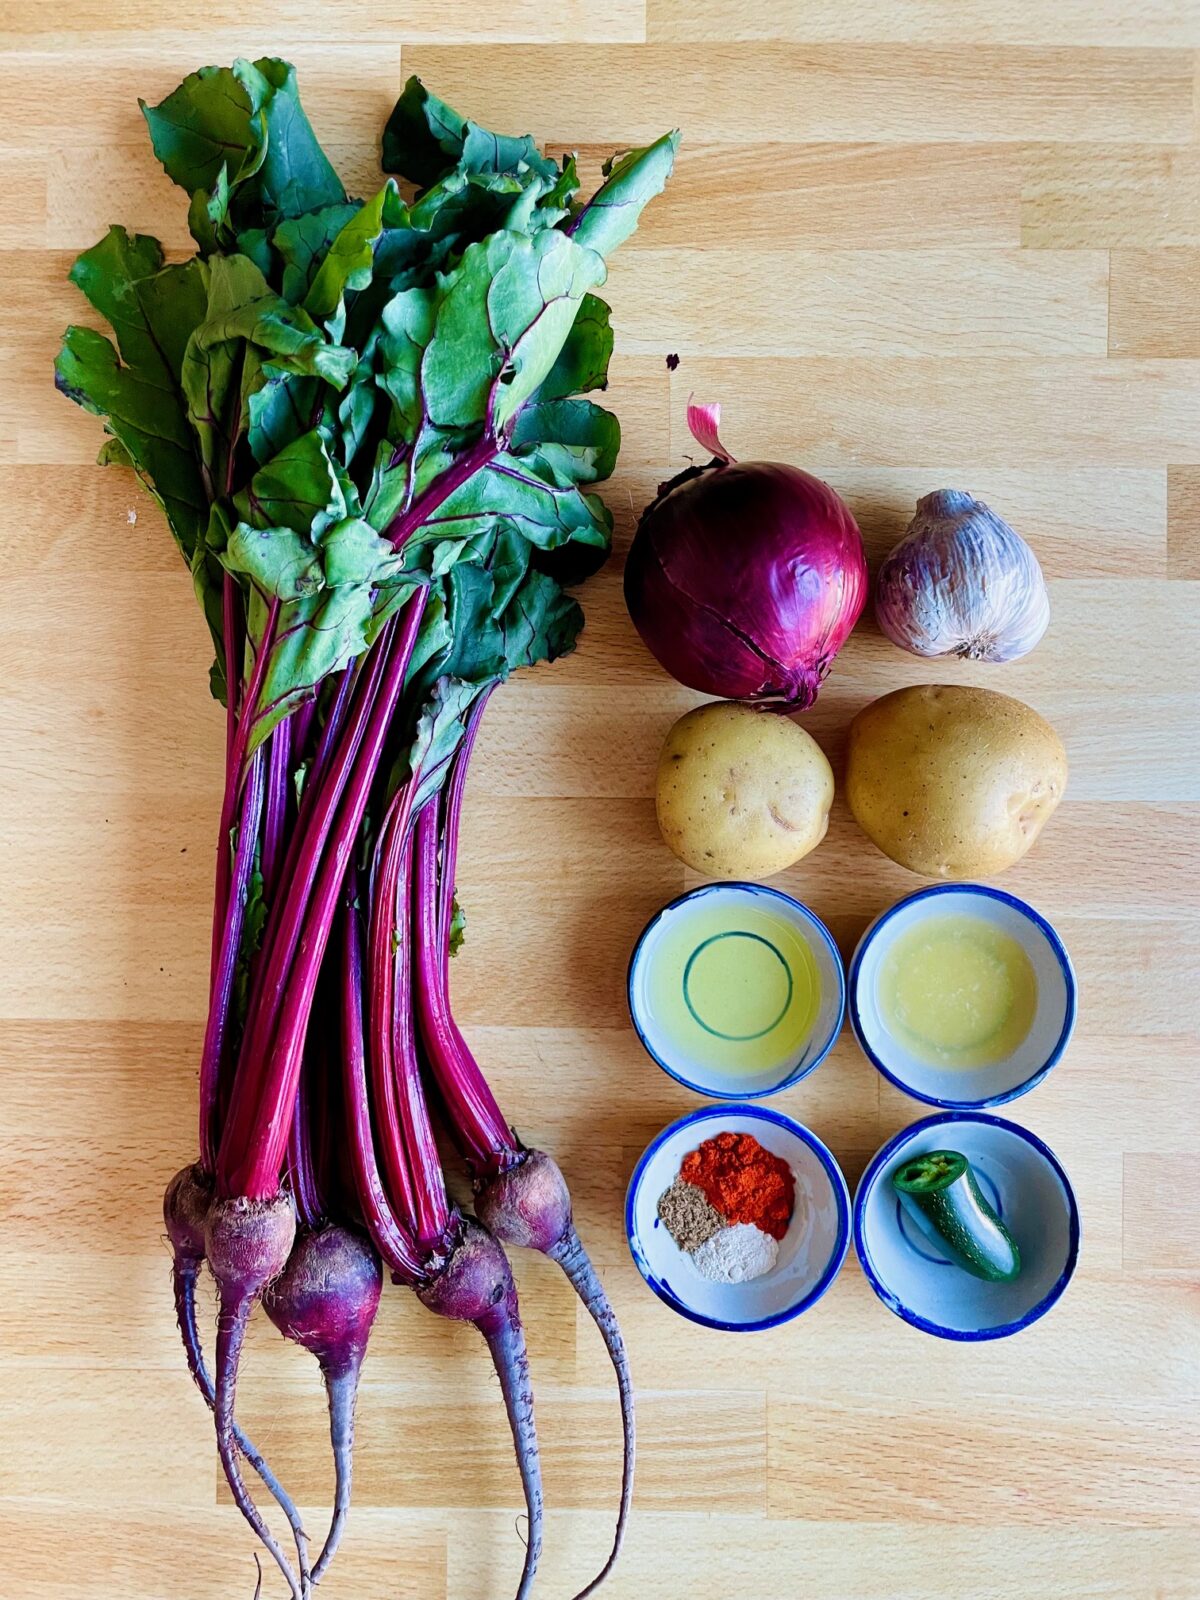 Ingredients for Ethiopian Beet Recipe: whole baby beets with greens attached, whole red onion, purple garlic clove, yellow potatoes, and ingredients in bowls: vegetable oil, fresh lemon juice, spices and half a jalapeno.